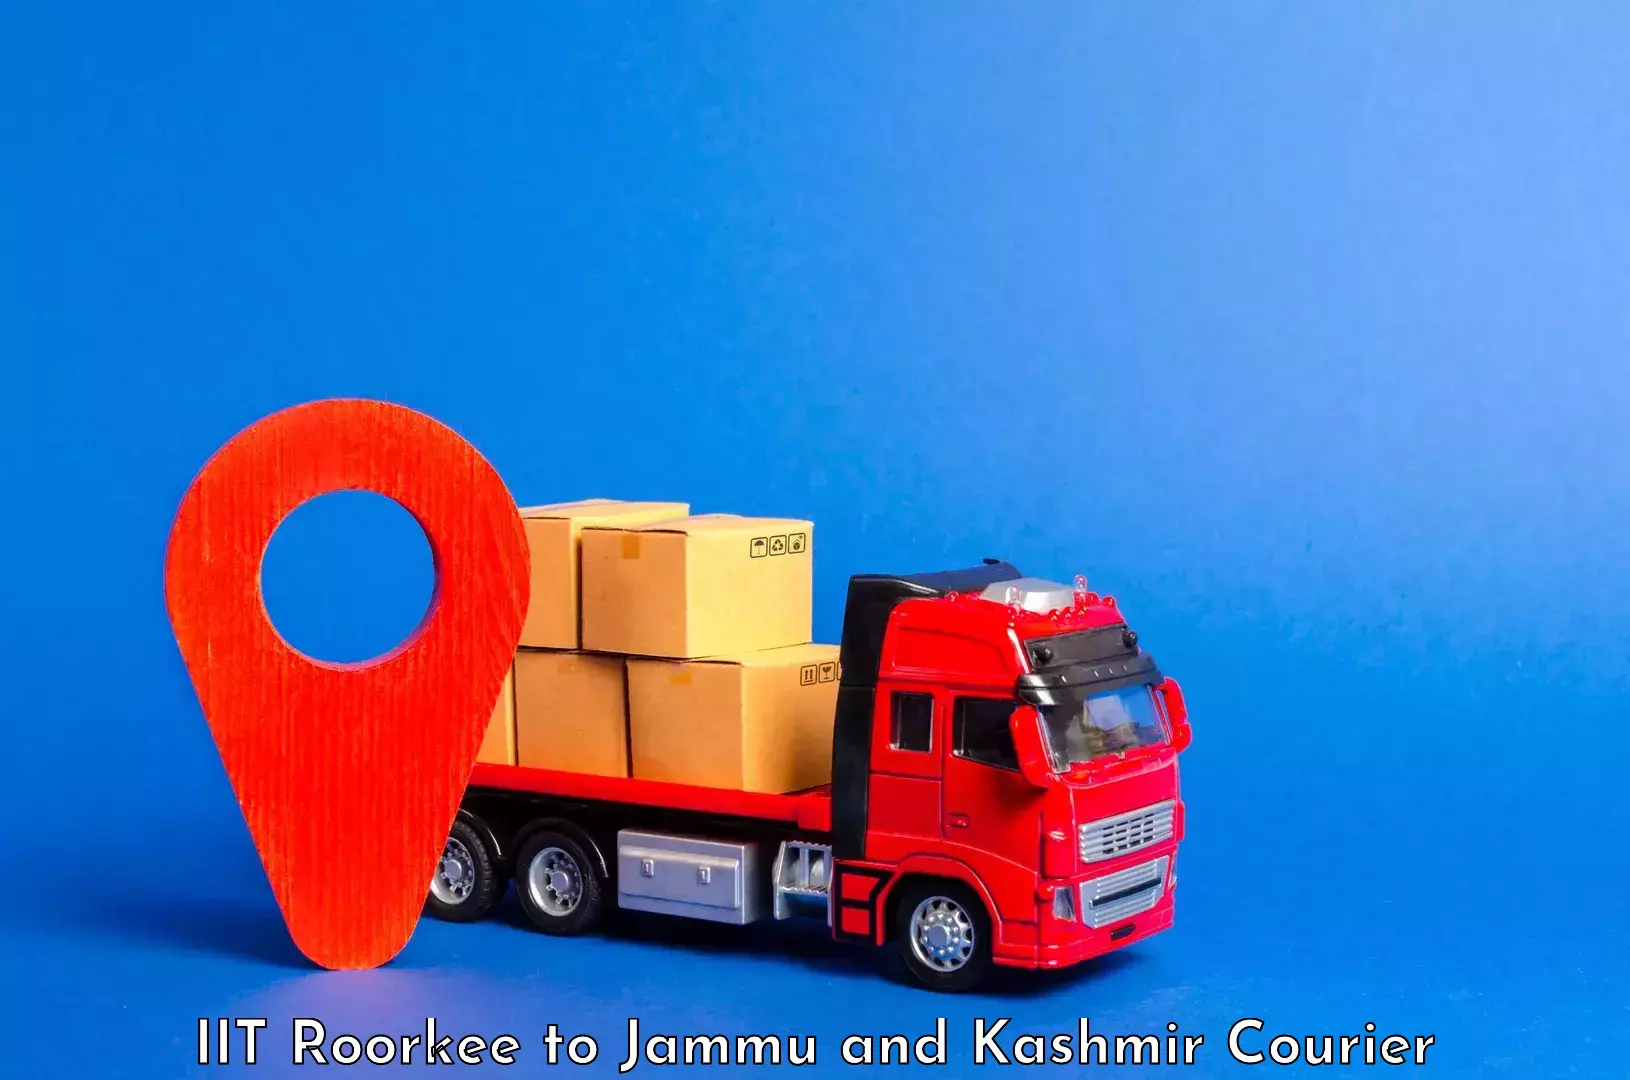 Luggage delivery network IIT Roorkee to Sopore